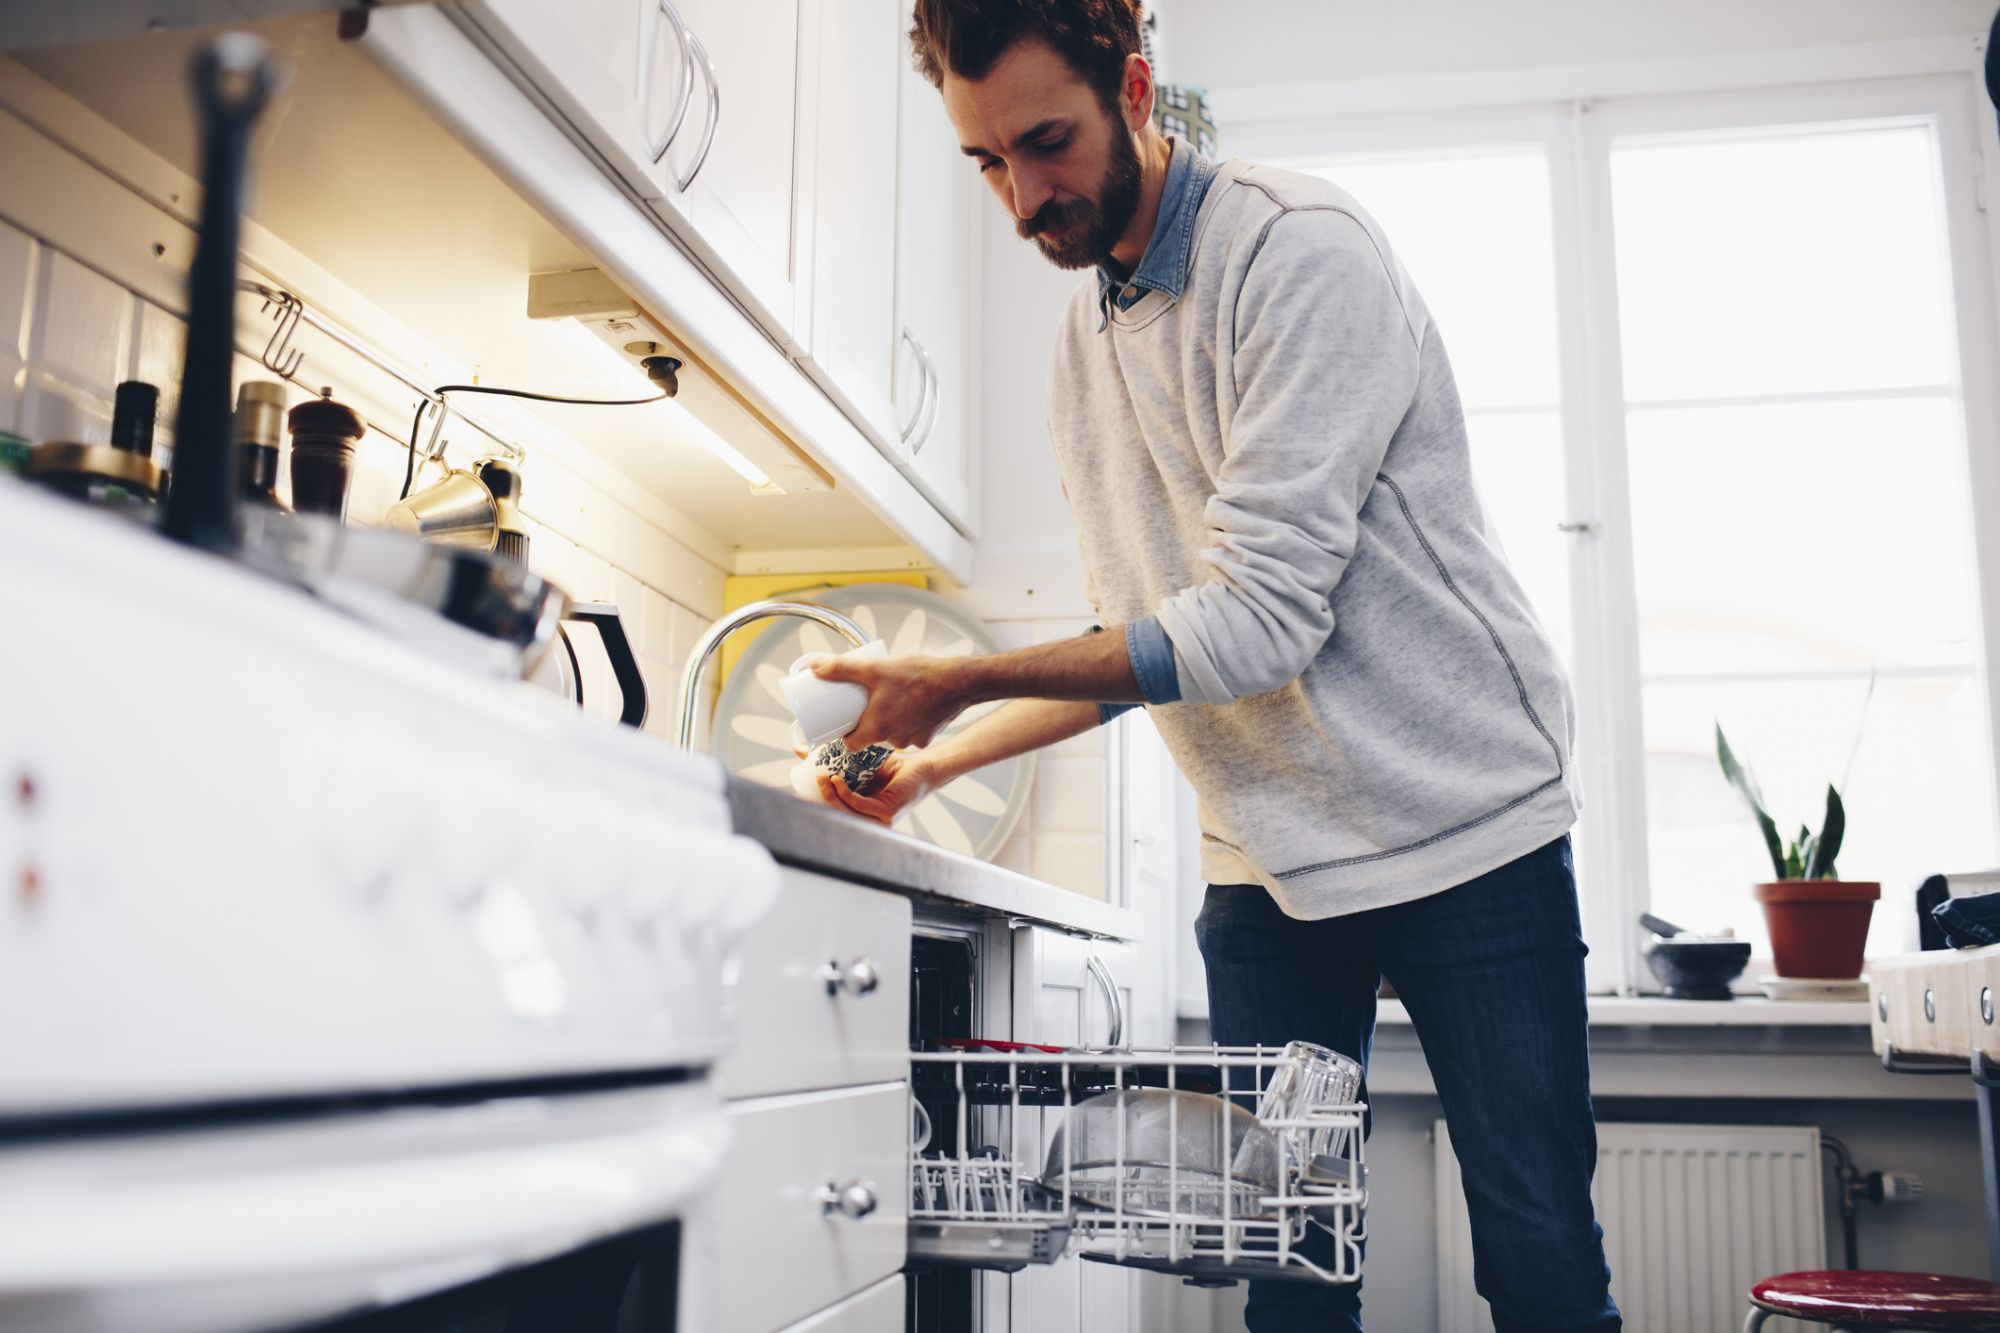 Want a Brilliant Business Idea? Wash the Dishes.